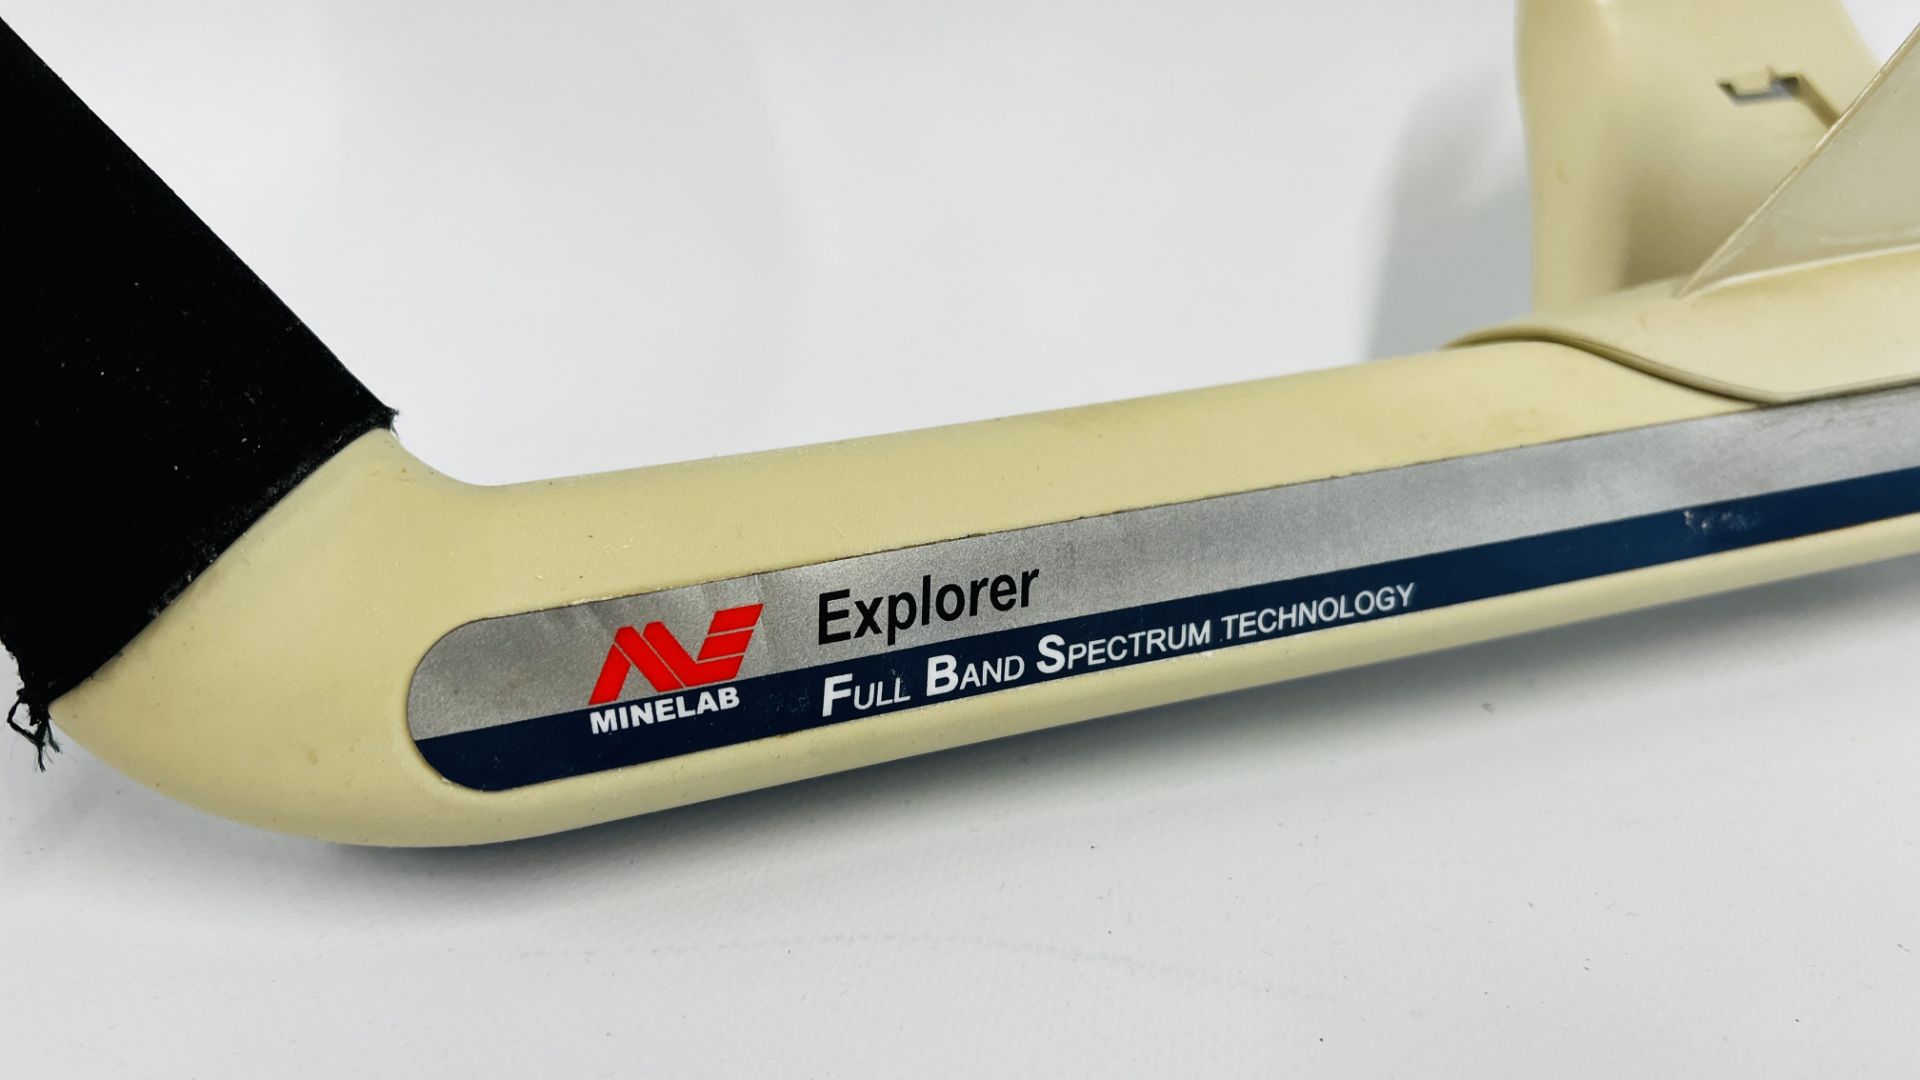 AN EXPLORER NUMINELAB FULL BAND SPECTRUM TECHNOLOGY METAL DETECTOR. - Image 2 of 6